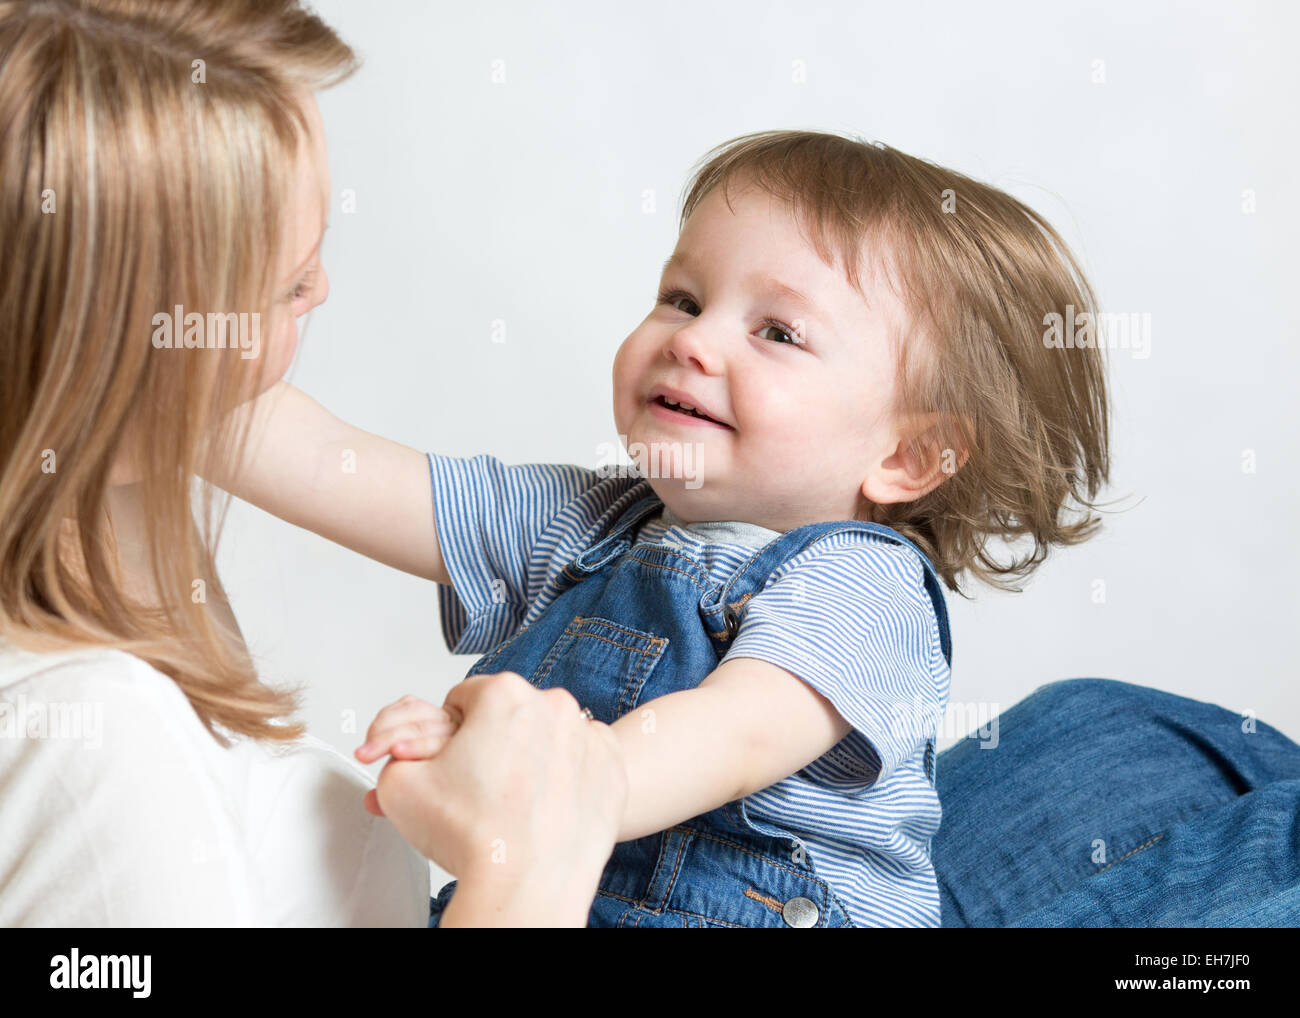 Mom and kid having fun pastime. Parenthood happiness conception. Stock Photo